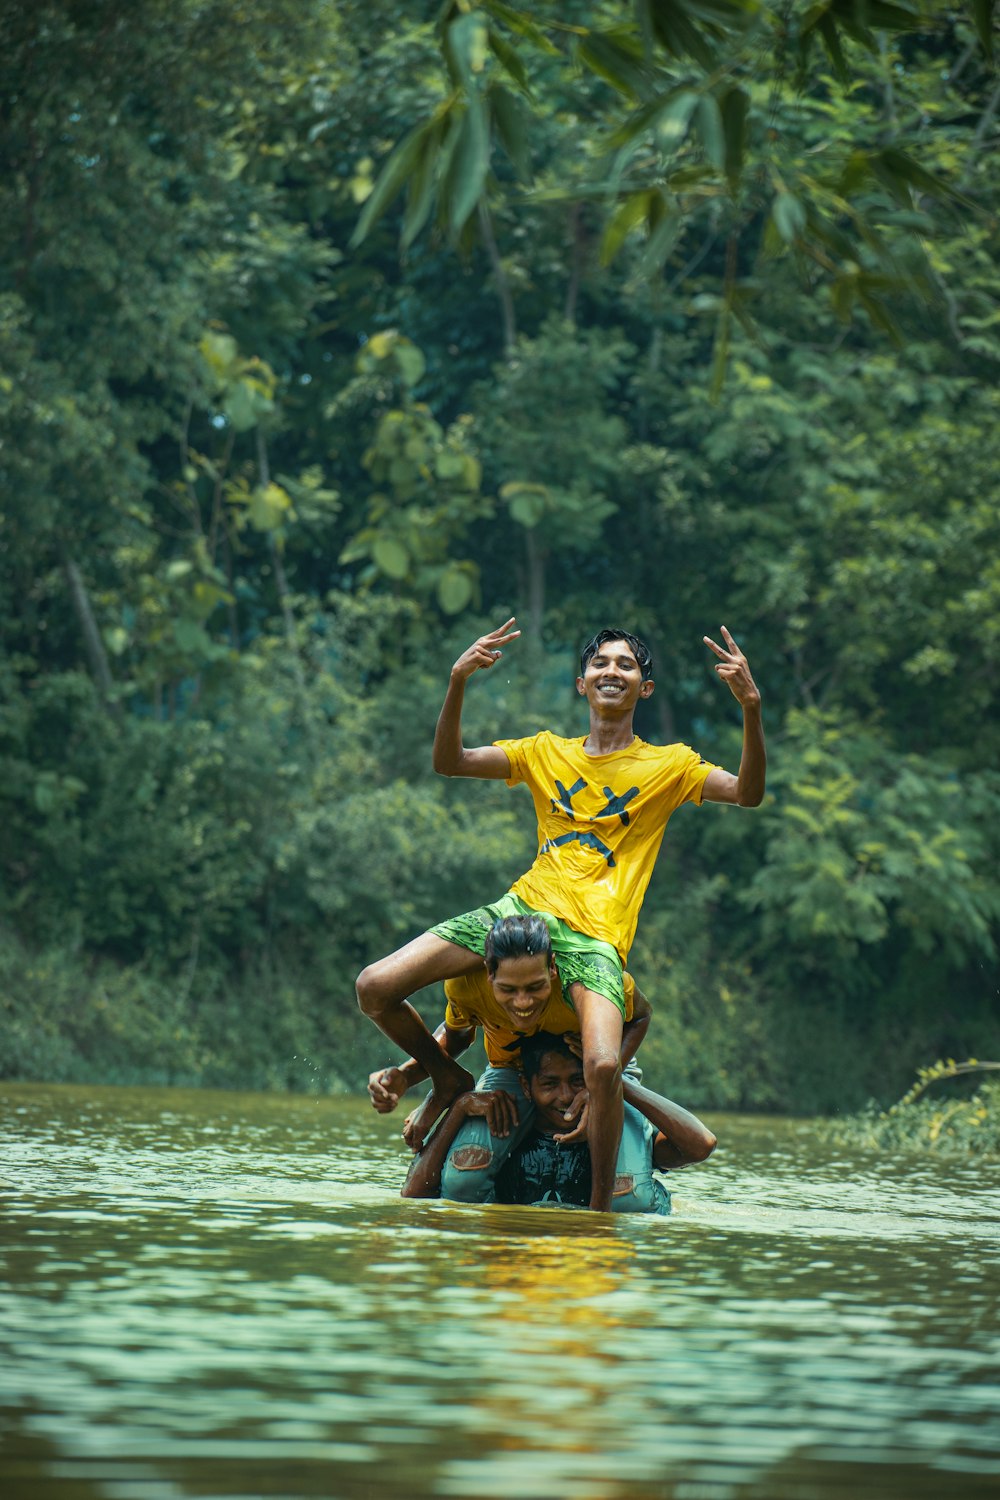 2 boys in yellow shirt jumping on water during daytime